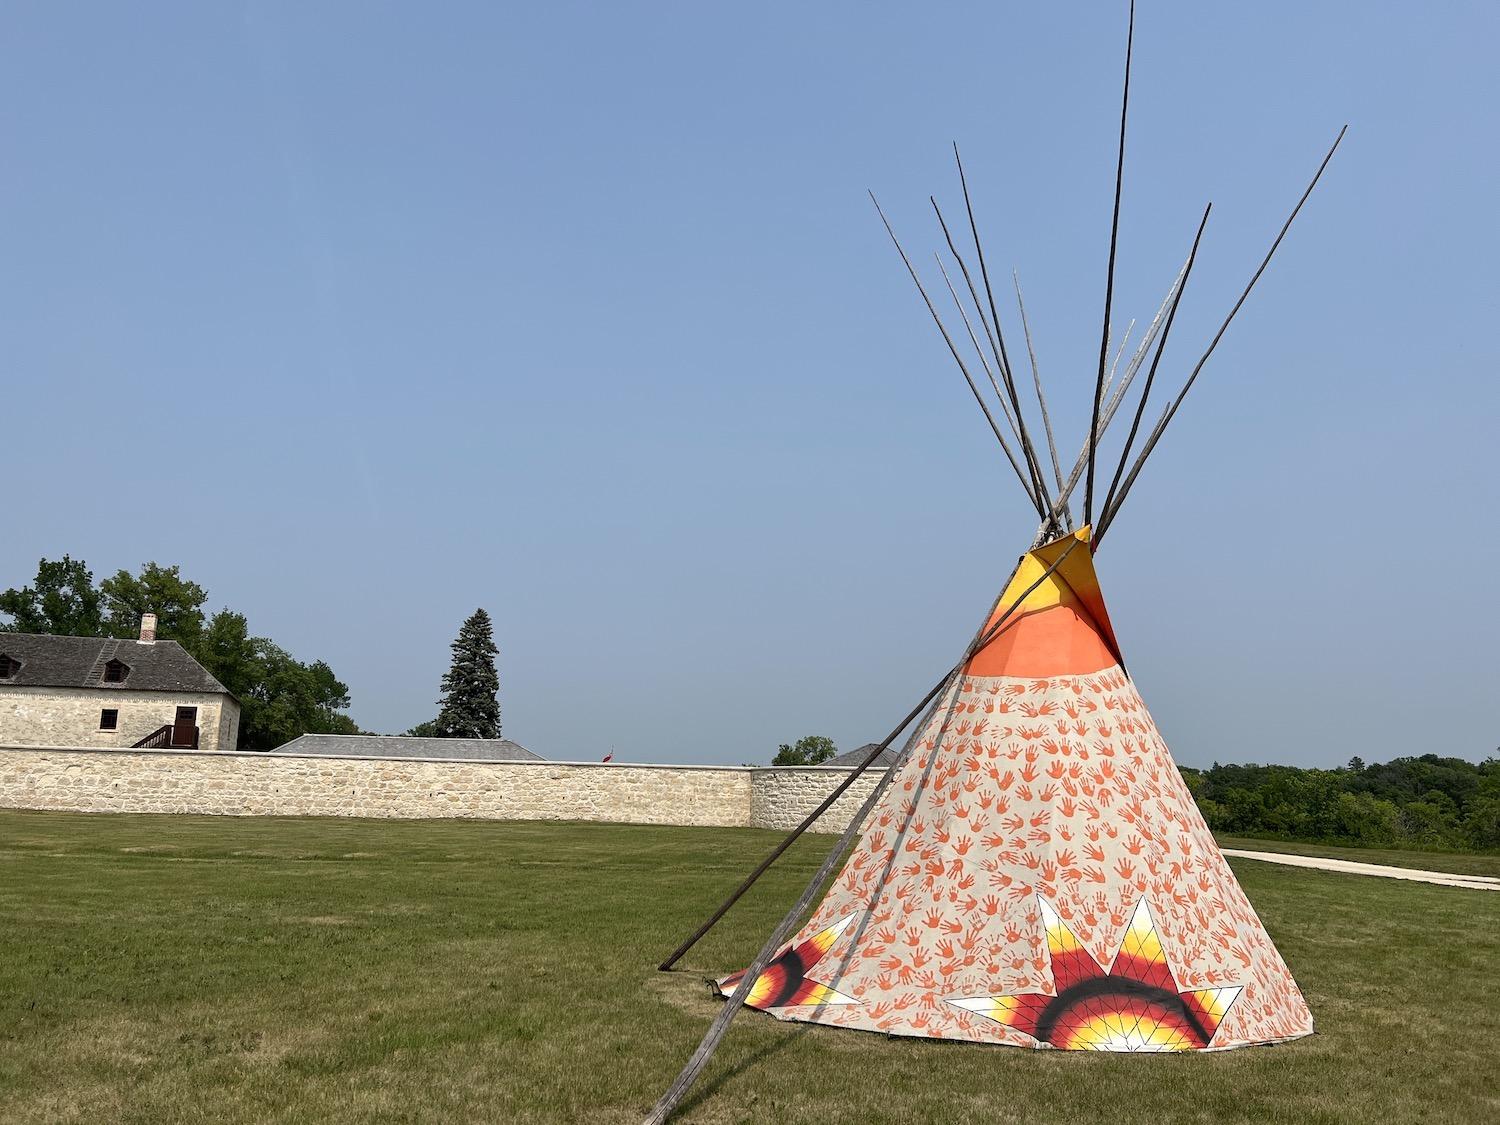 Just outside the limestone walls of Lower Fort Garry National Historic Site is a painted tipi that honors residential school survivors and the memory of those who were lost.